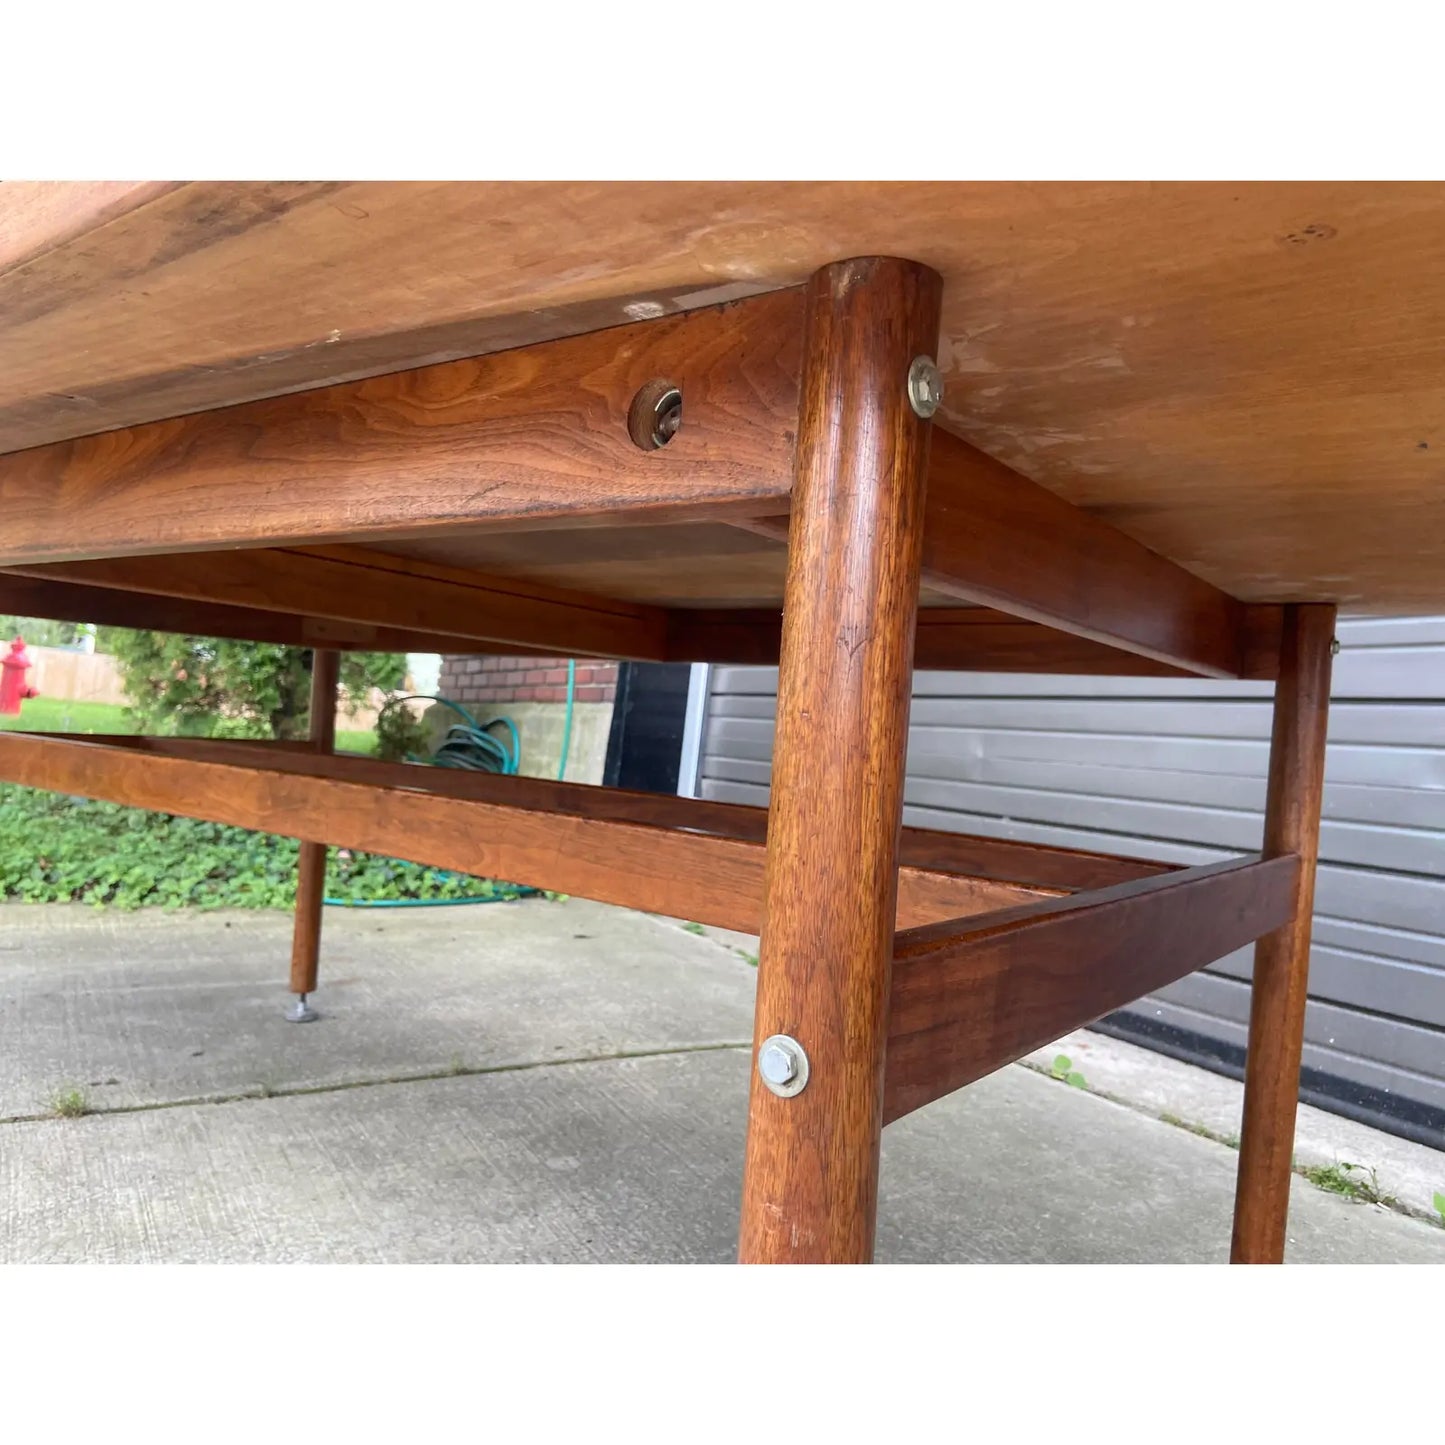 MID-CENTURY JENS RISOM DINING / CONFERENCE TABLE